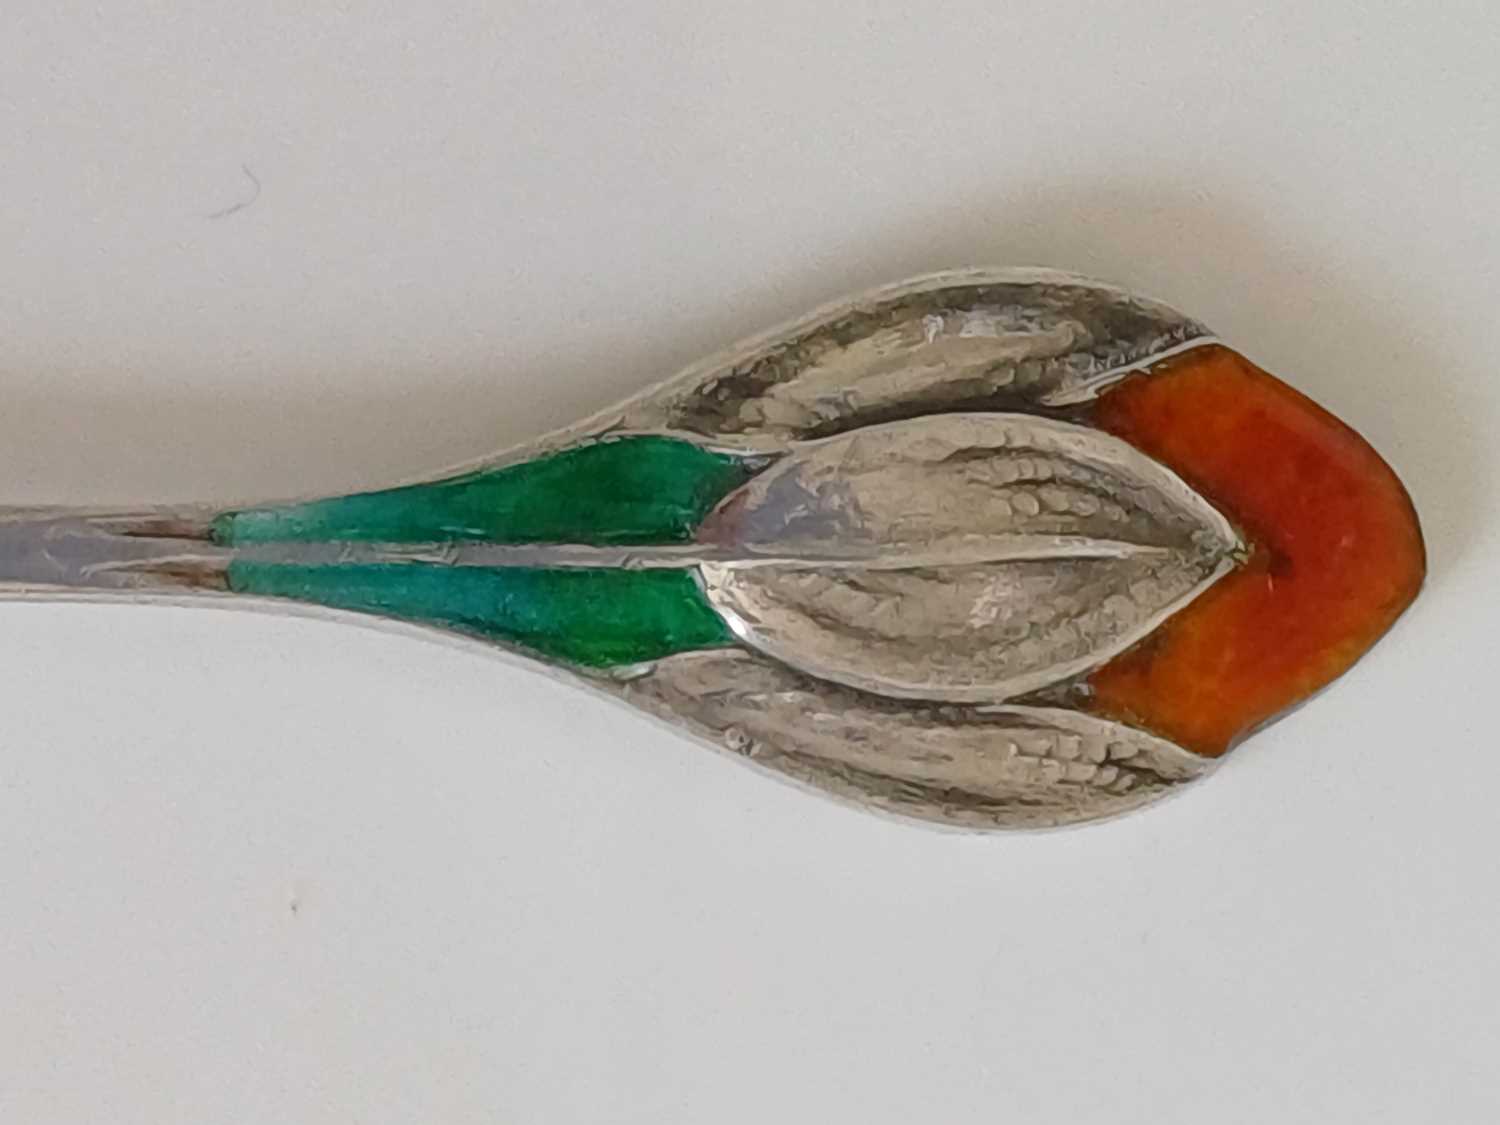 A Matched Set of Six Arts & Crafts Silver and Enamel Crocus Coffee Spoons, made by William Hair - Image 13 of 14